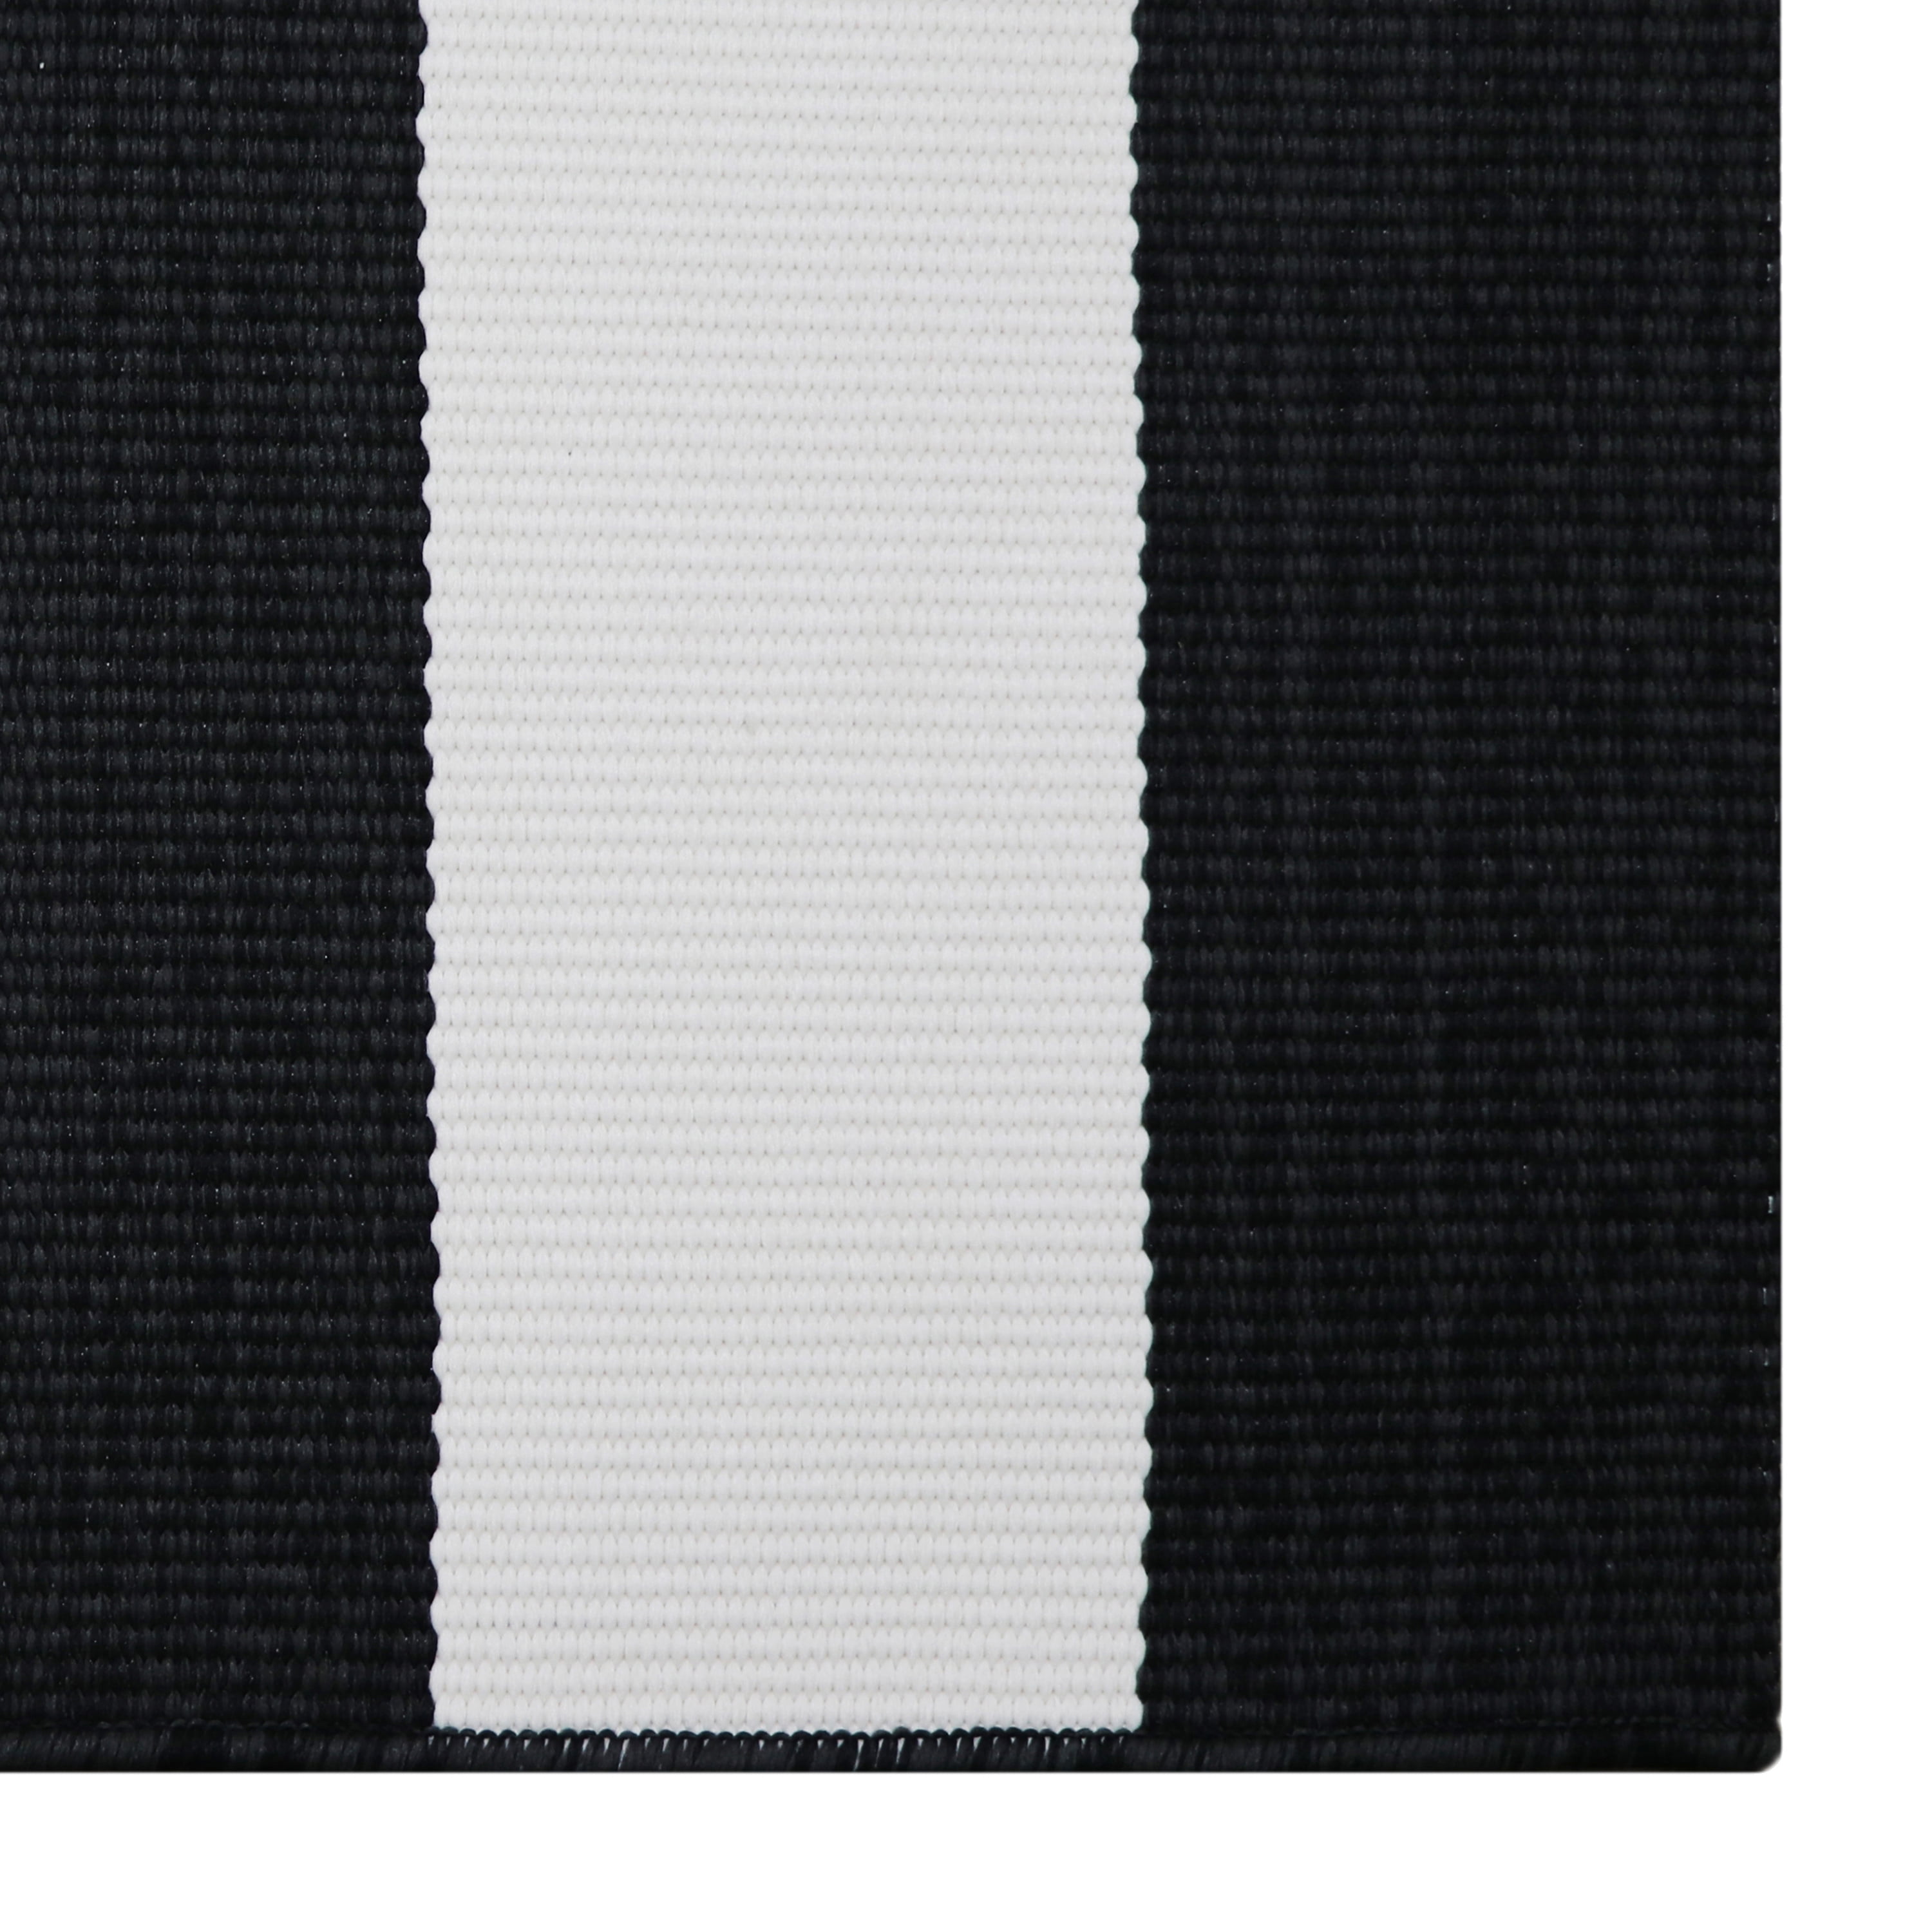 White Striped Outdoor Rug, Indoor Outdoor Black And White Striped Rug 8×10